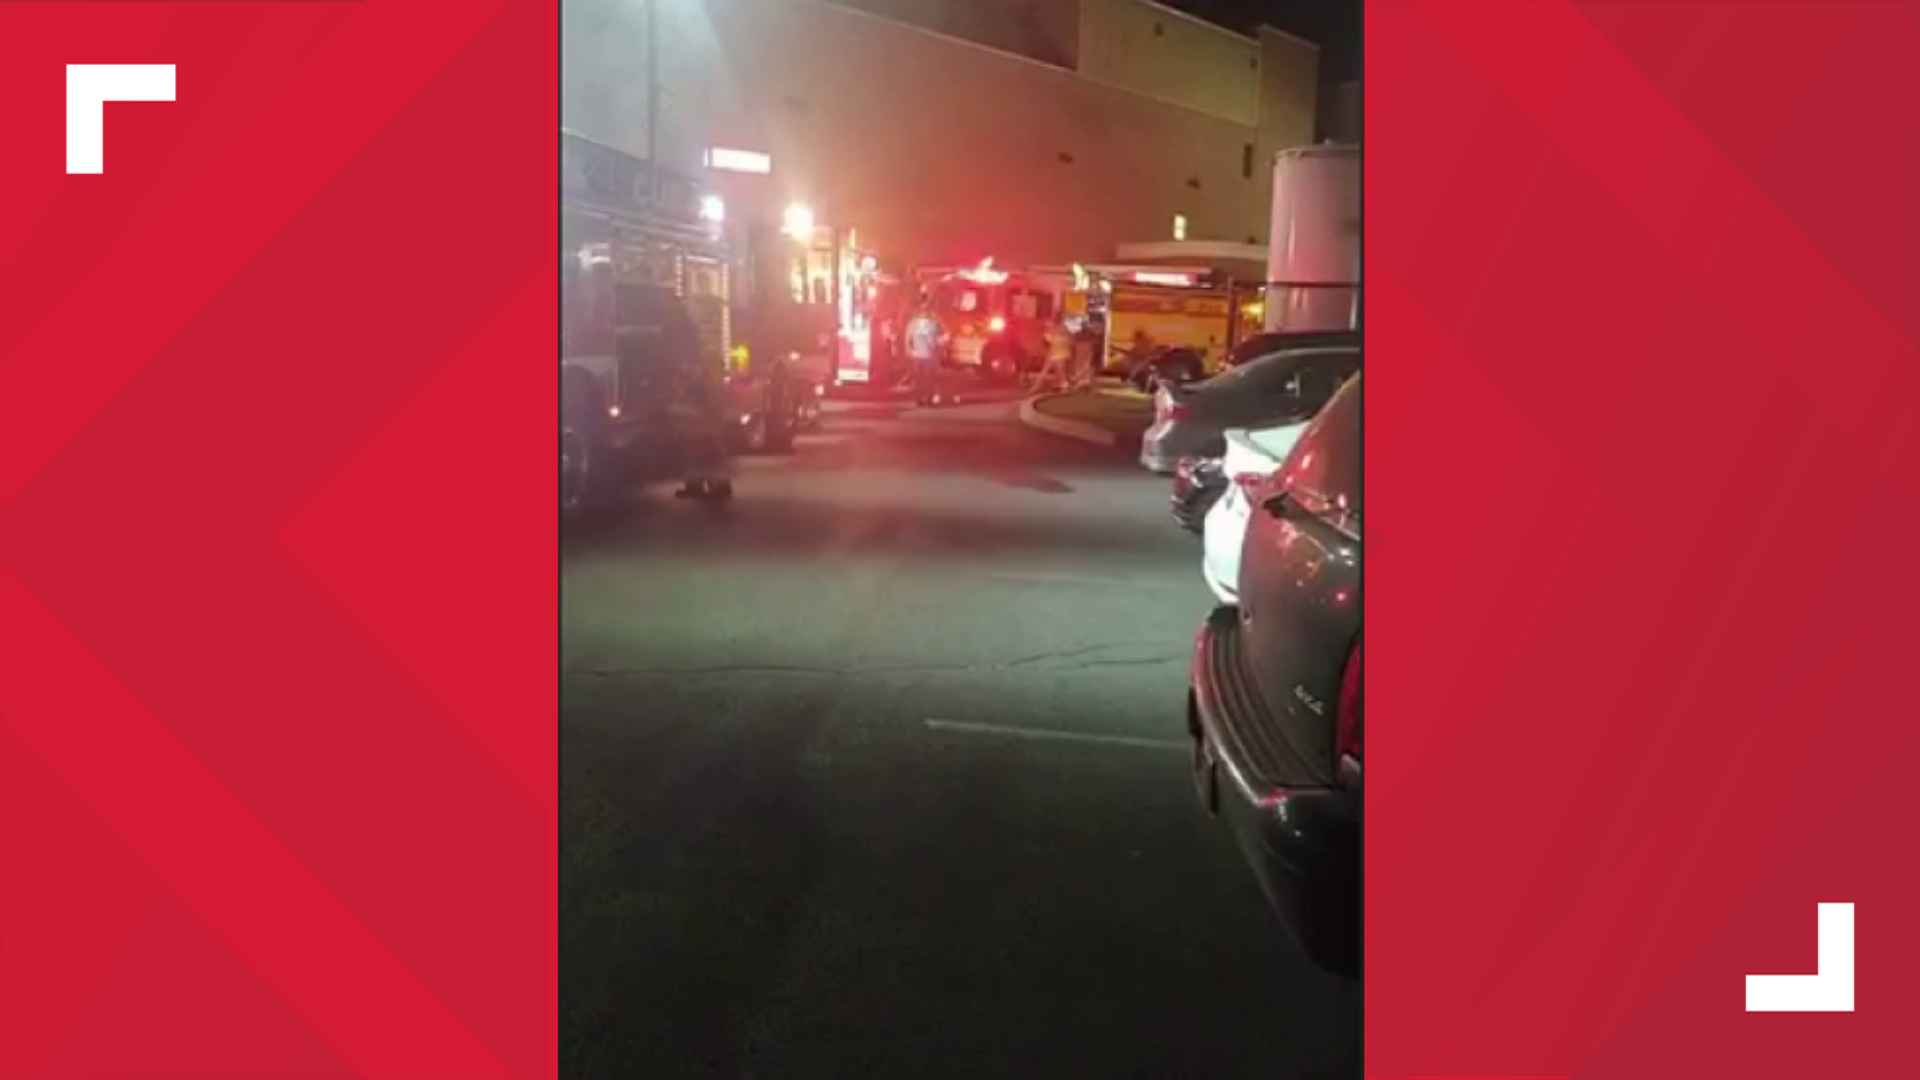 Fire sparked just before 9:00 at the hospital.